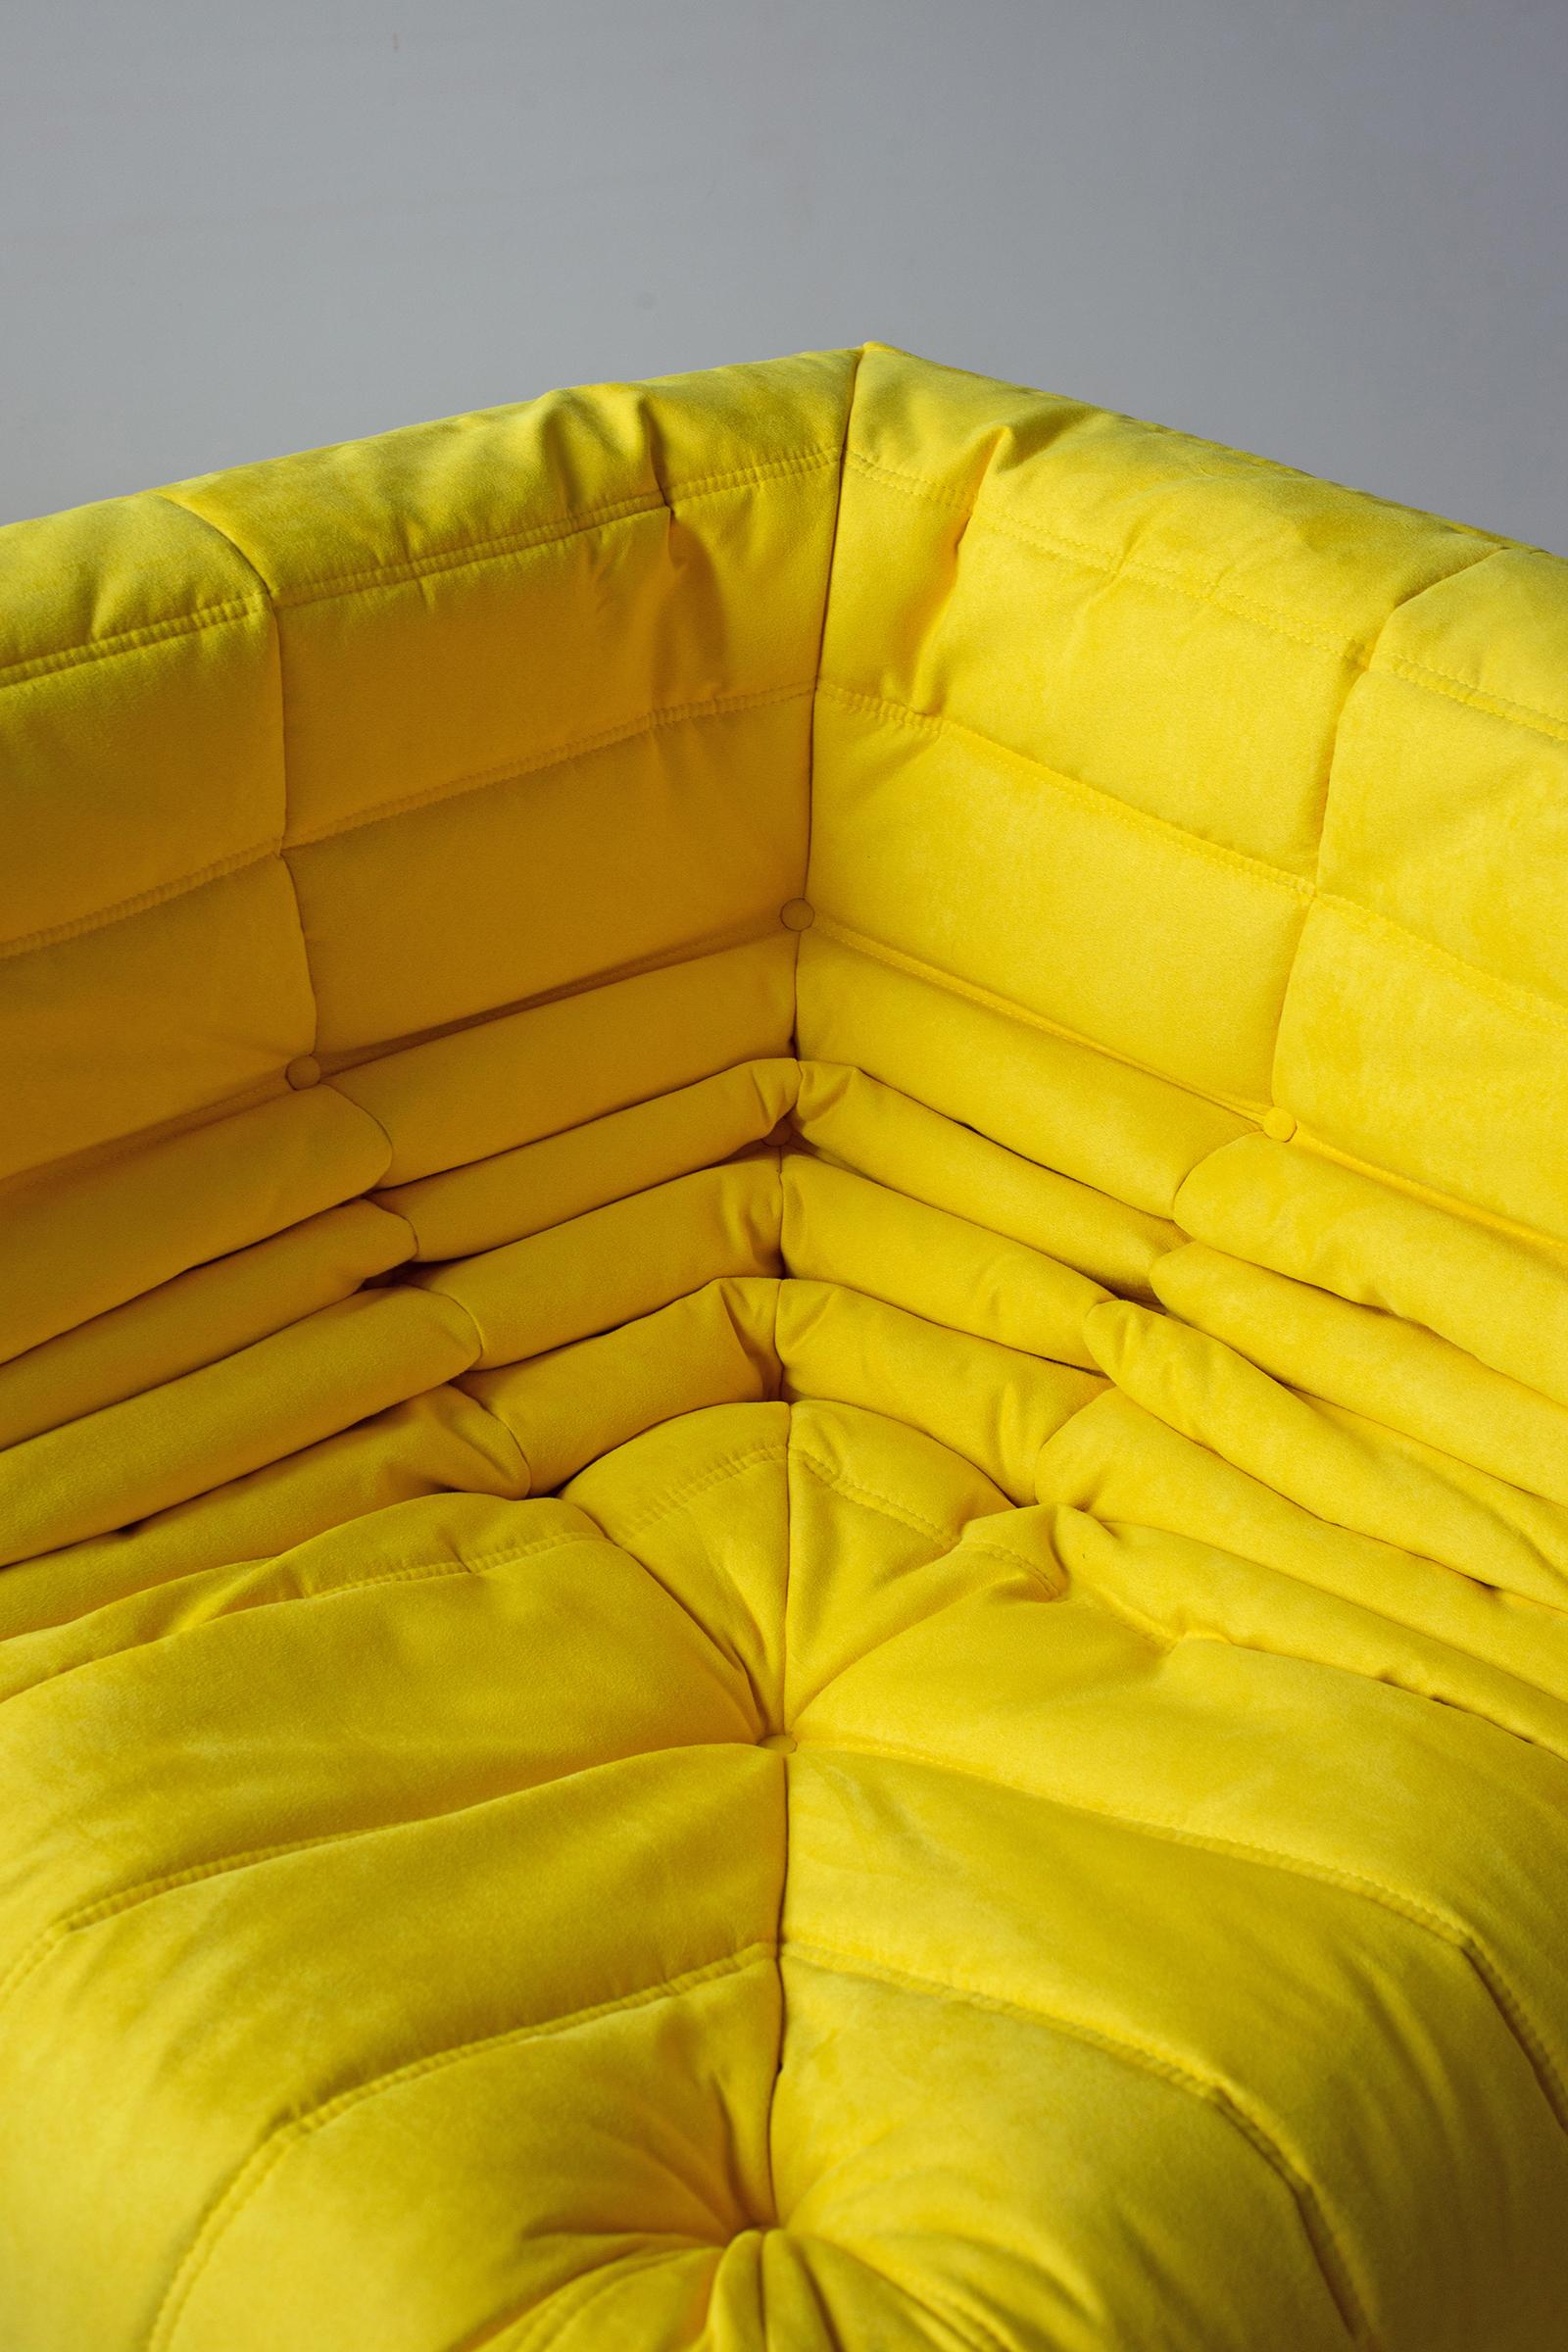 This Togo corner couch was designed by Michel Ducaroy in 1973 and was manufactured by Ligne Roset in France. It has been reupholstered in new yellow microfibre (102 x 102 x 70 cm). It has the original Ligne Roset logo and genuine Ligne Roset